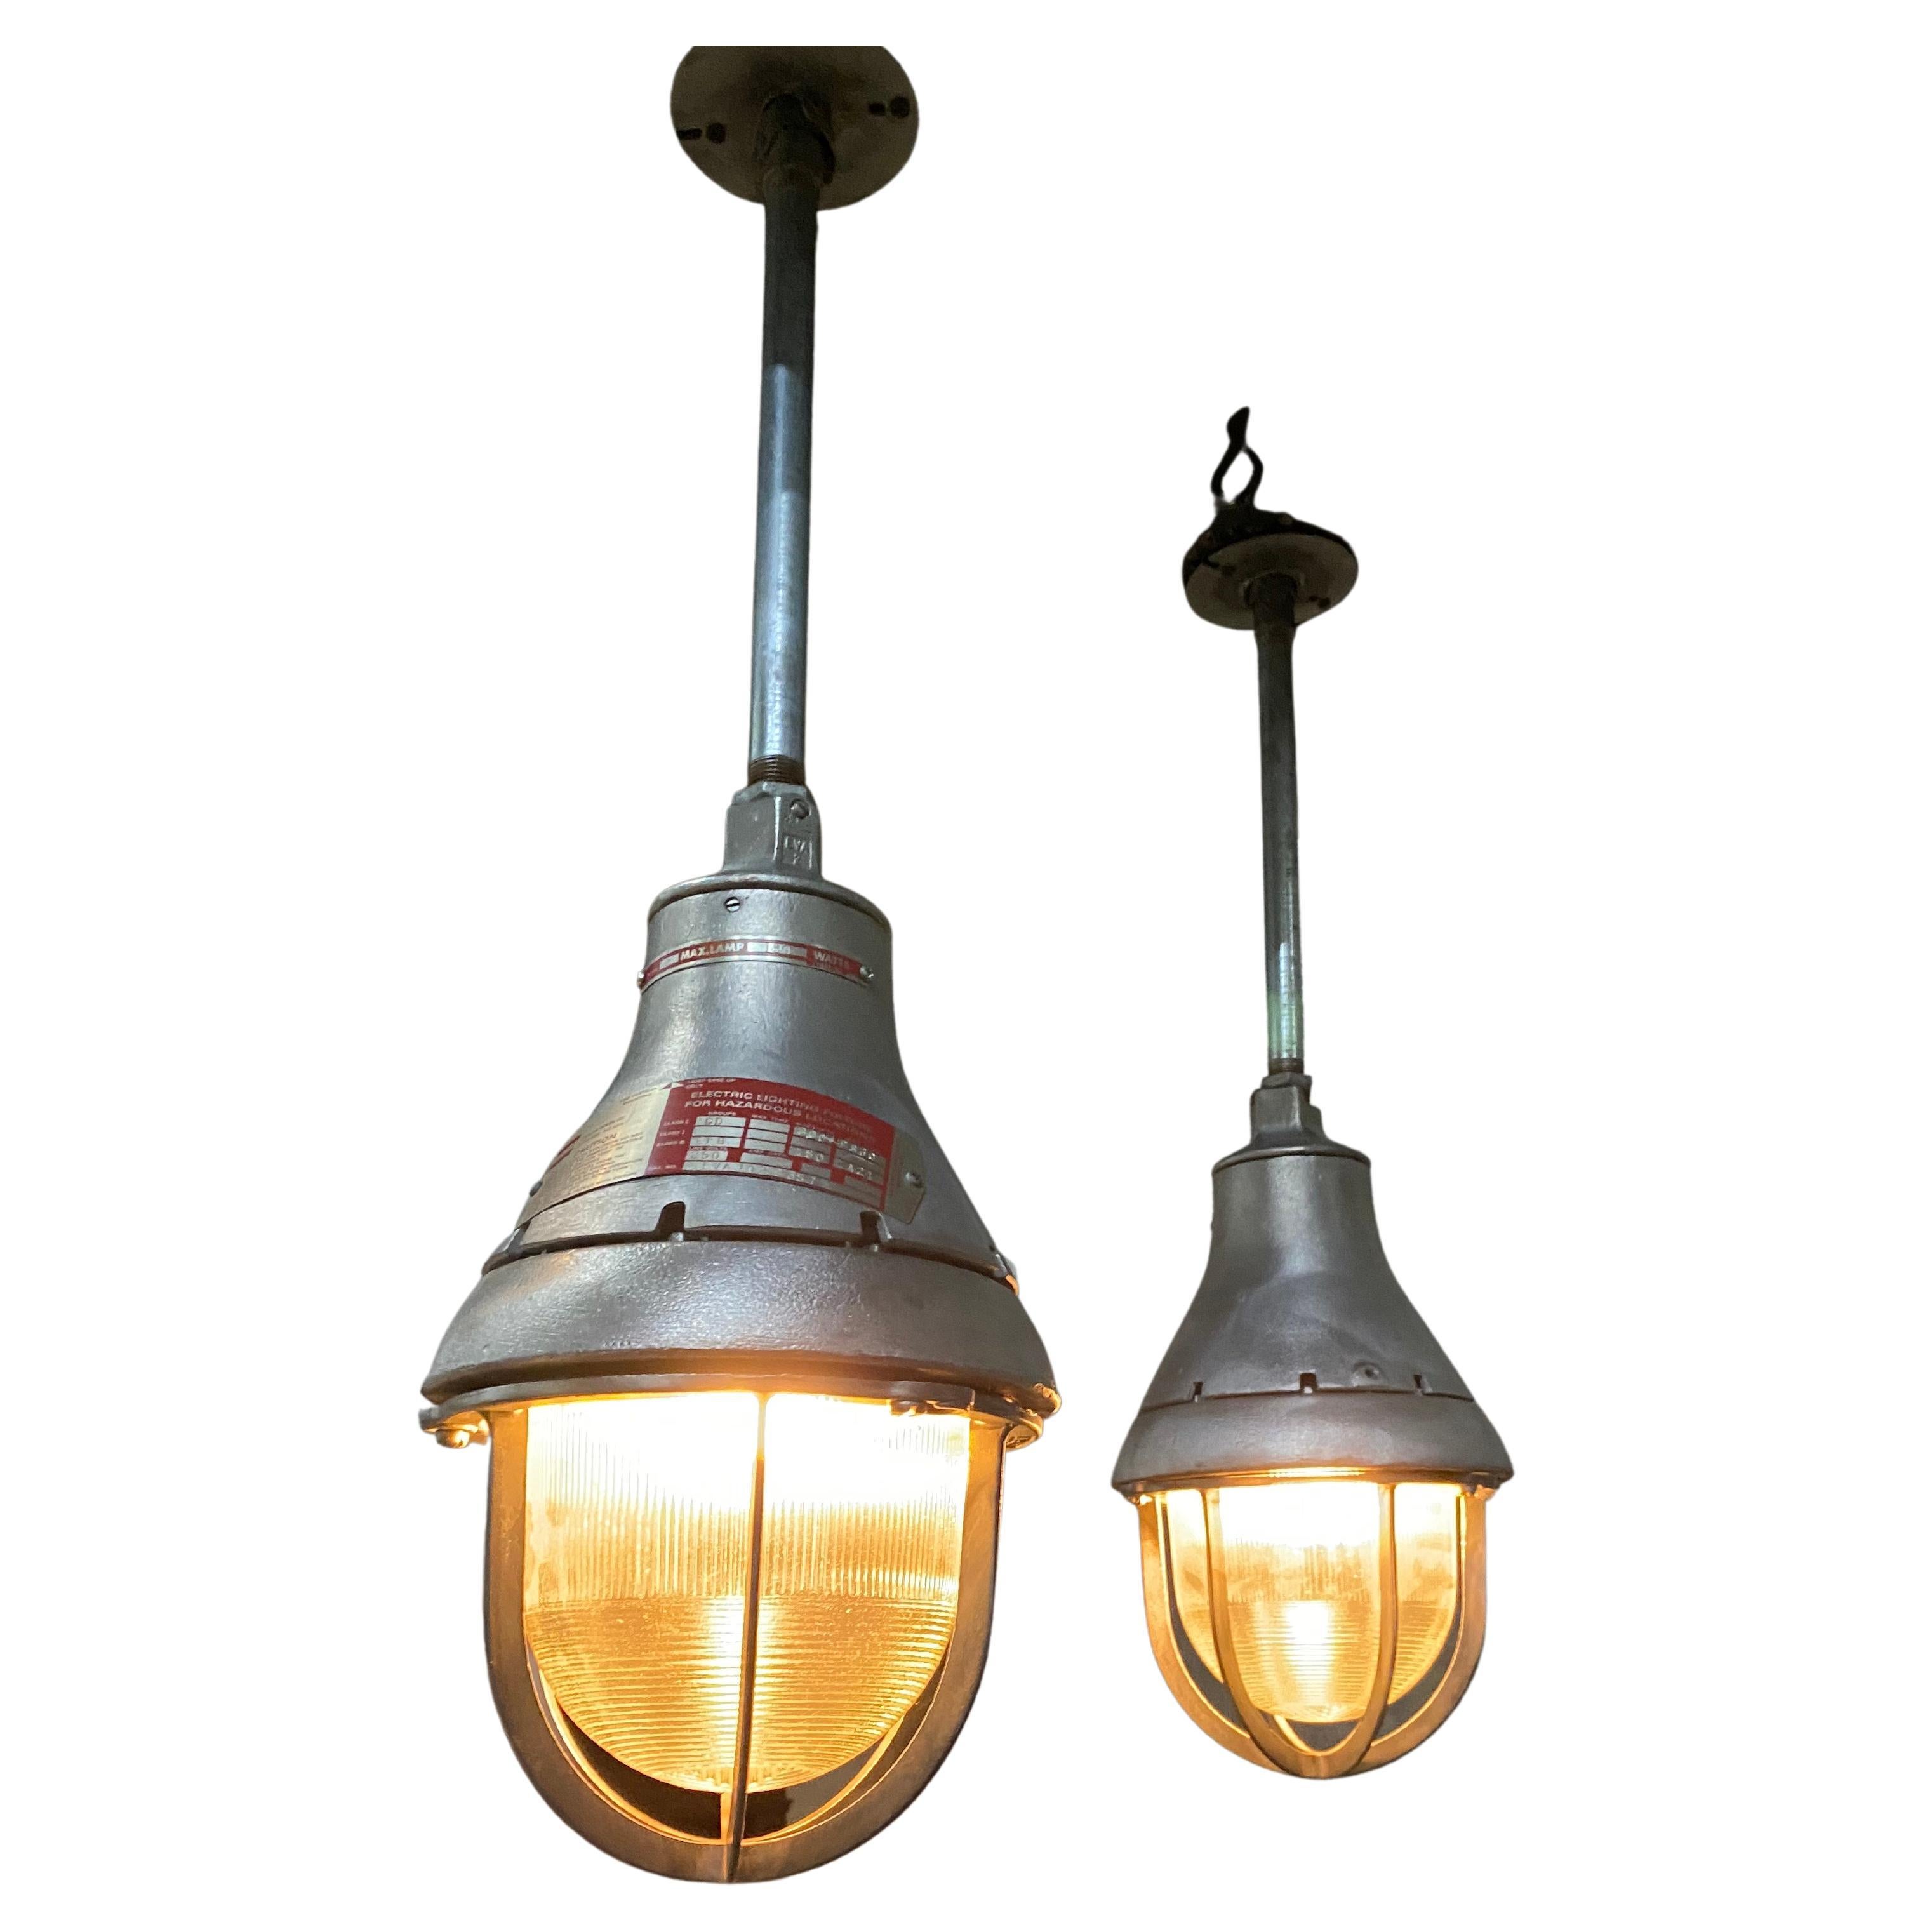 1930 Crouse Hinds Industrial Pendant For Sale